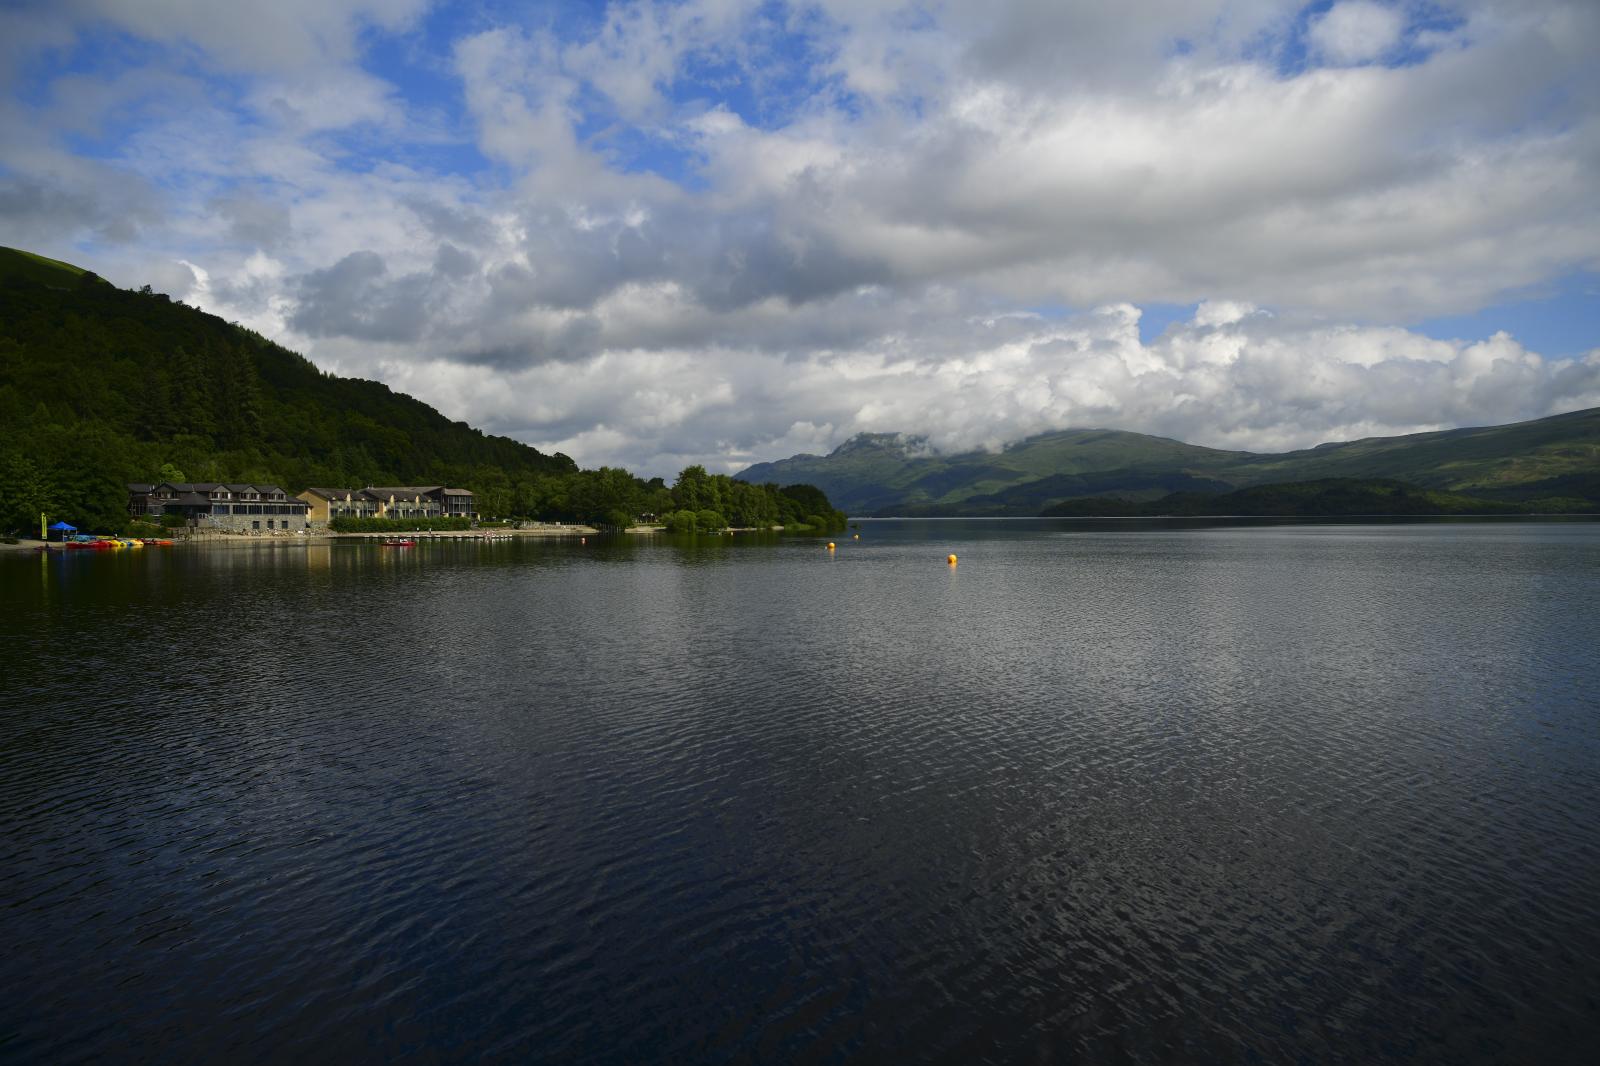 Image from Daily Life UK - Loch Lomond in the West coast of Scotland